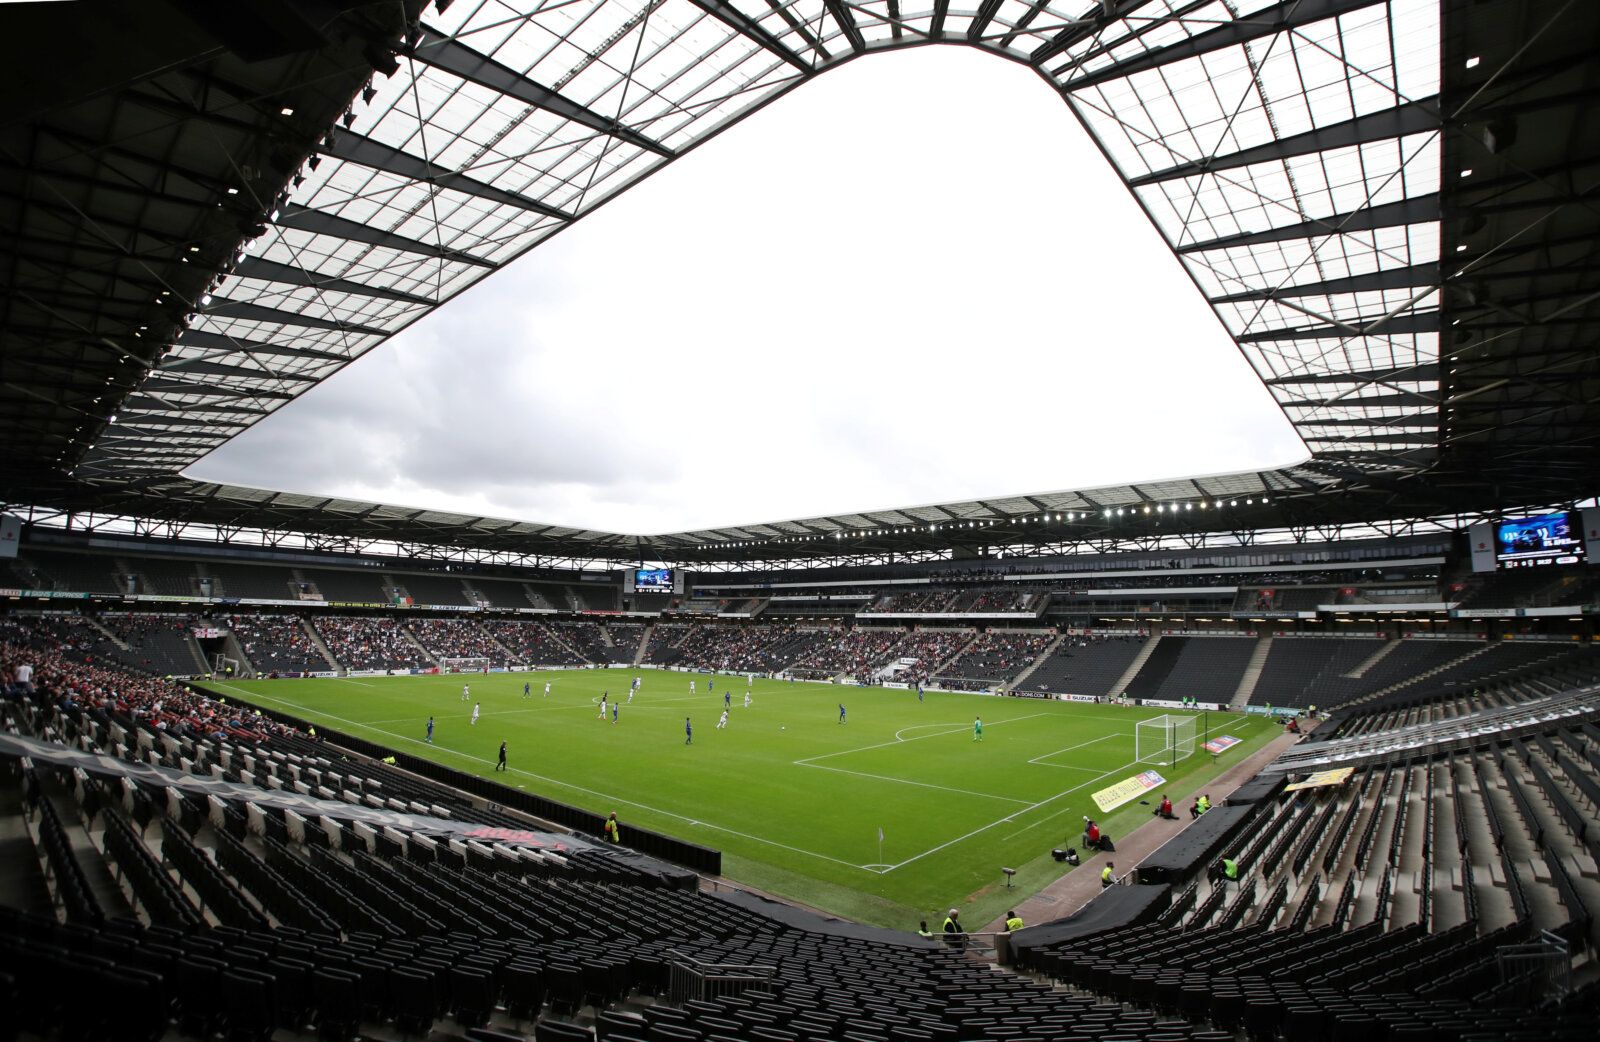 Soccer Football - League One - Milton Keynes Dons v AFC Wimbledon - Stadium MK, Milton Keynes, Britain - September 7, 2019   General view during the match   Action Images/Peter Cziborra    EDITORIAL USE ONLY. No use with unauthorized audio, video, data, fixture lists, club/league logos or 